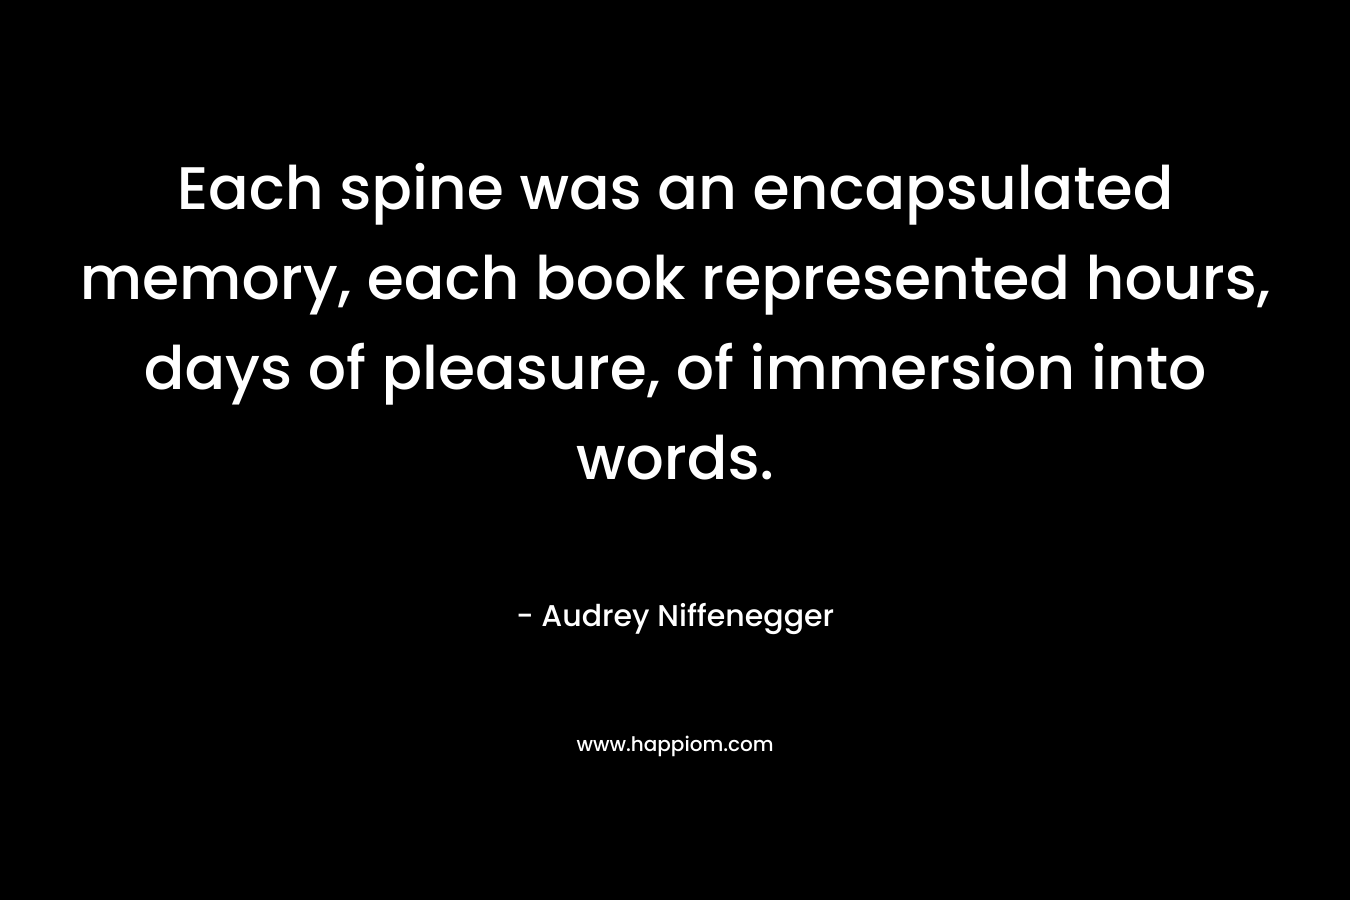 Each spine was an encapsulated memory, each book represented hours, days of pleasure, of immersion into words.